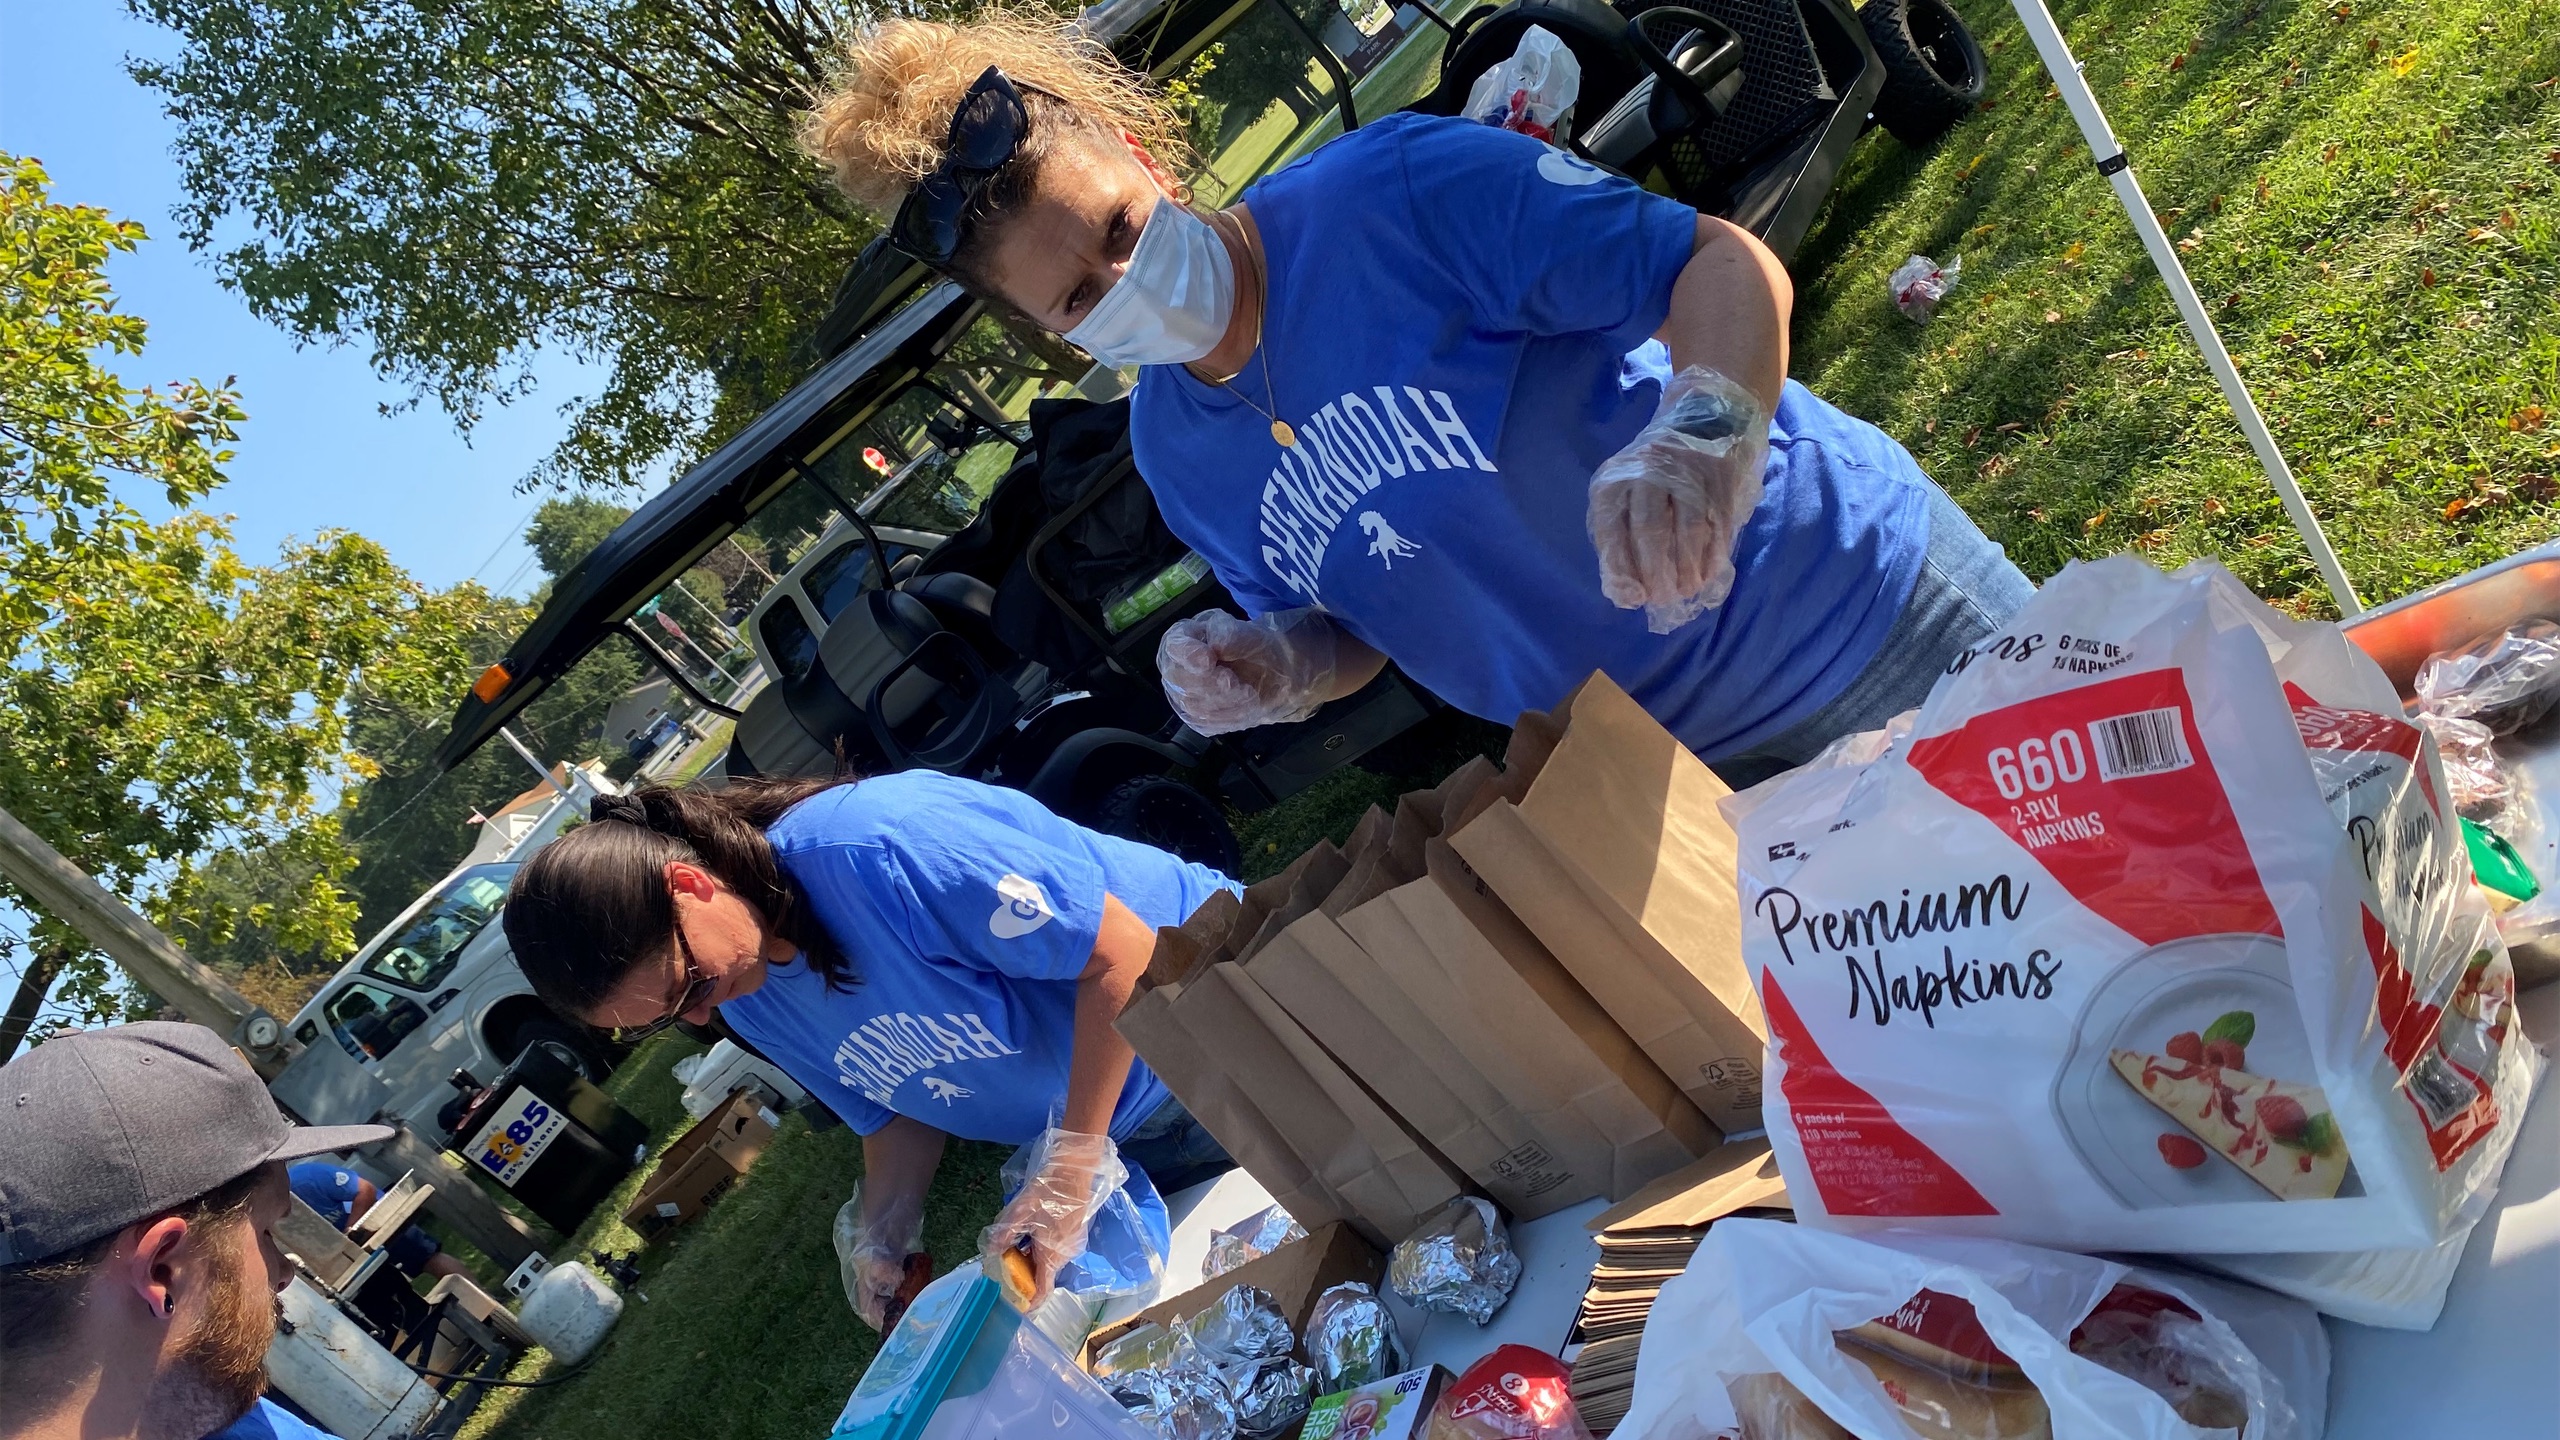 Green Plains employees preparing sack lunches at the Community Cookout